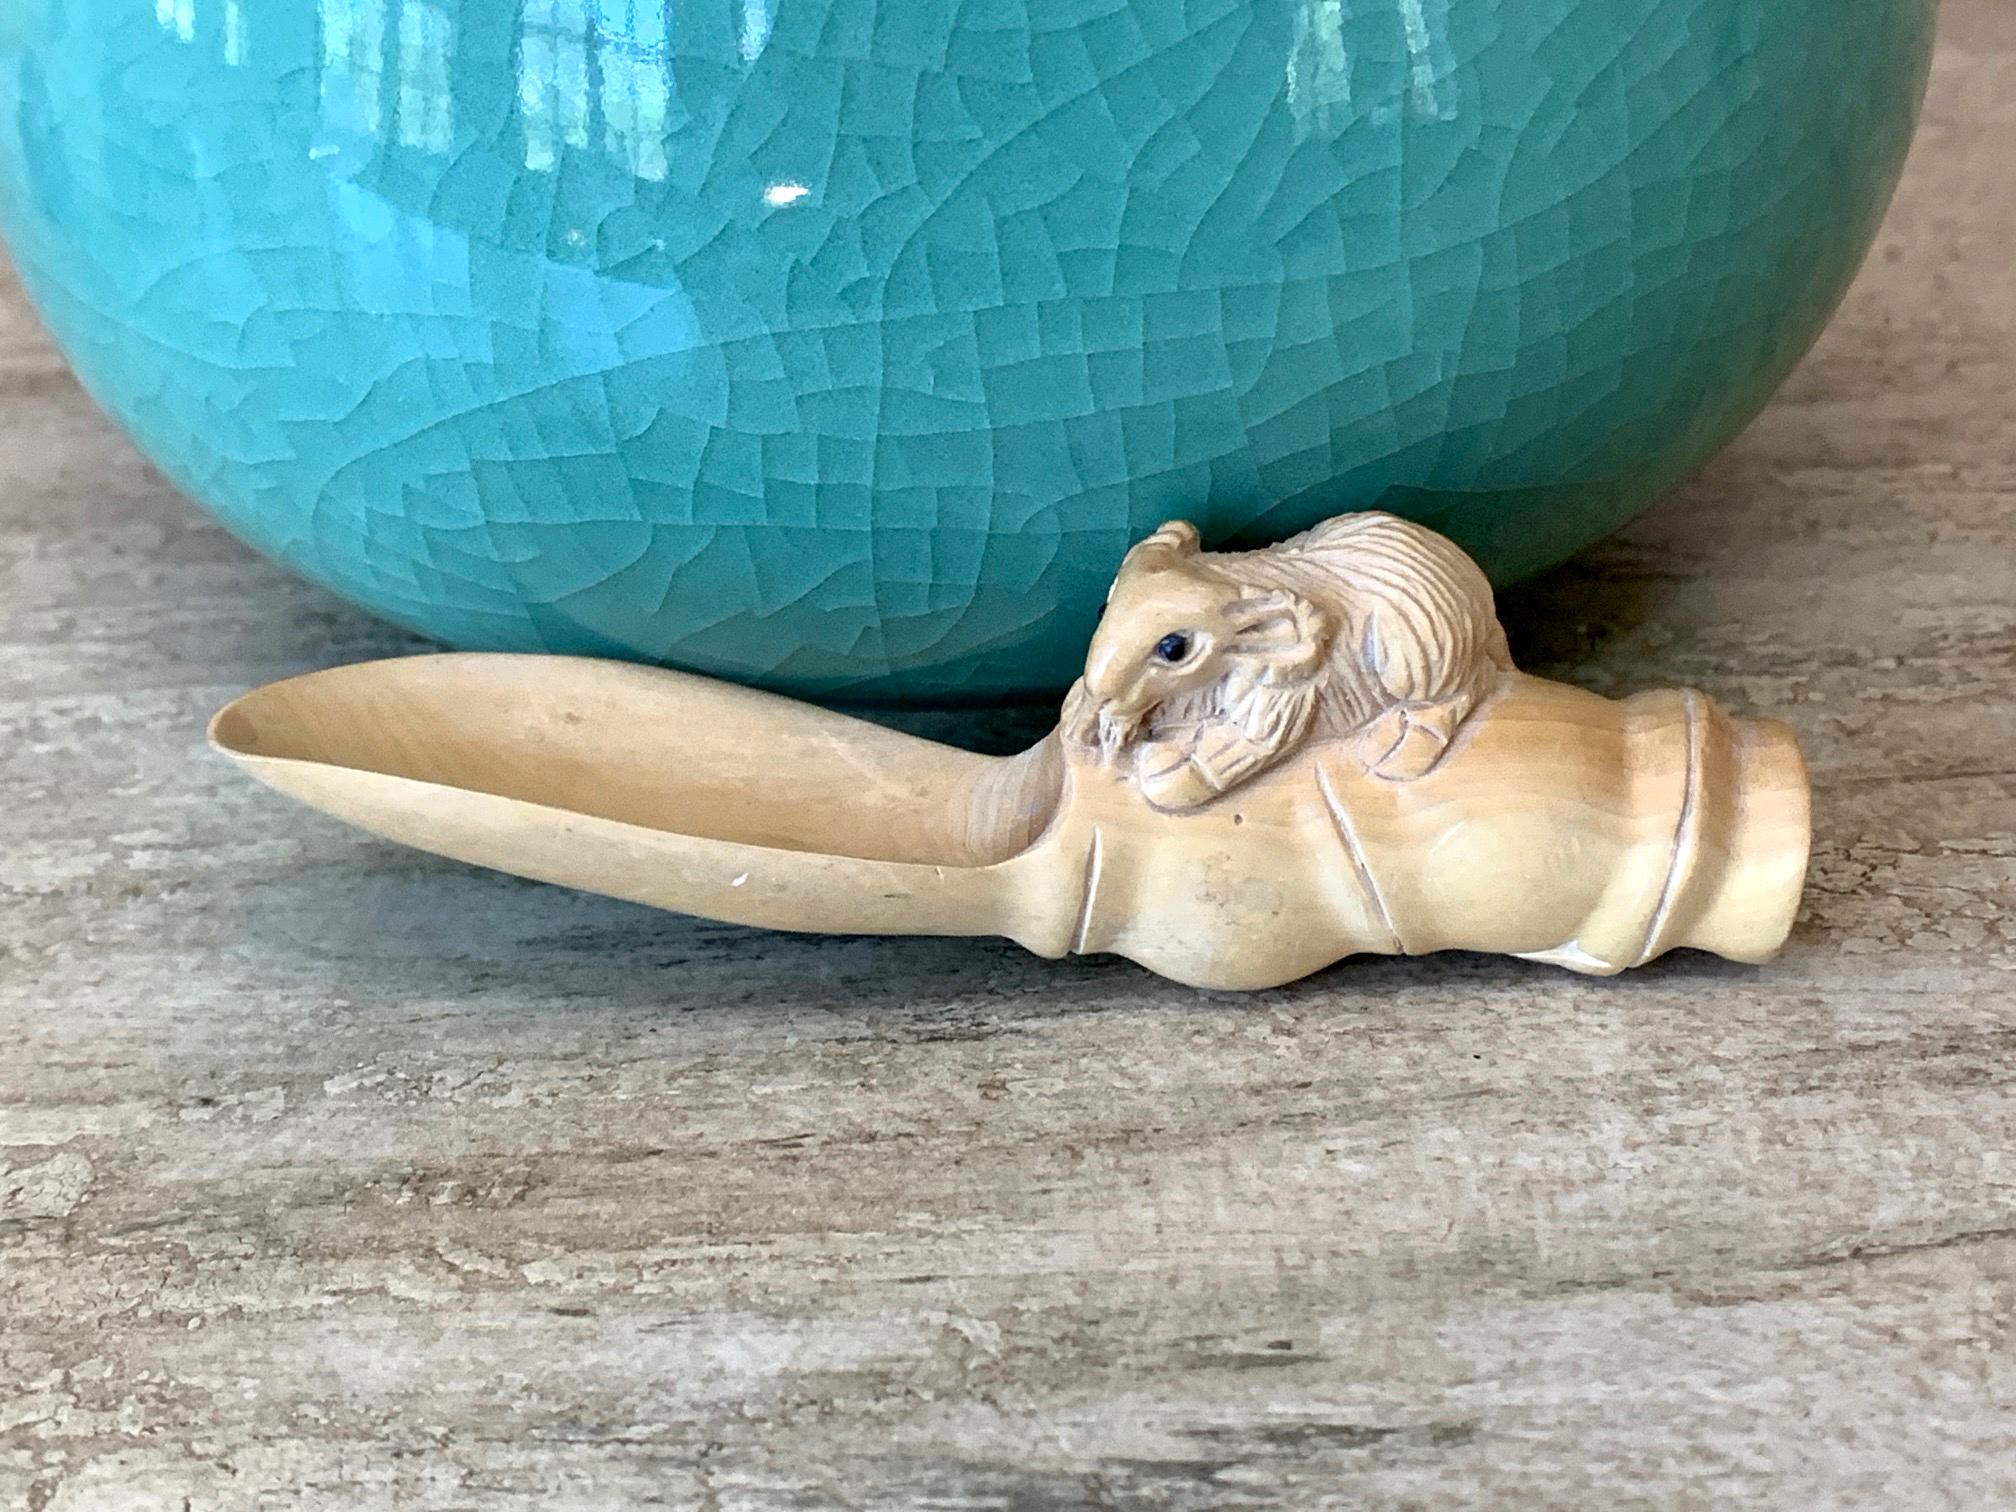 A Japanese netsuke circa first half of 20th century. The whimsical piece was carved out a light-colored wood depicting a small mouse climbing a giant spoon. The rendition is realistic yet at the same time surreal in scale and proportion. The mouse